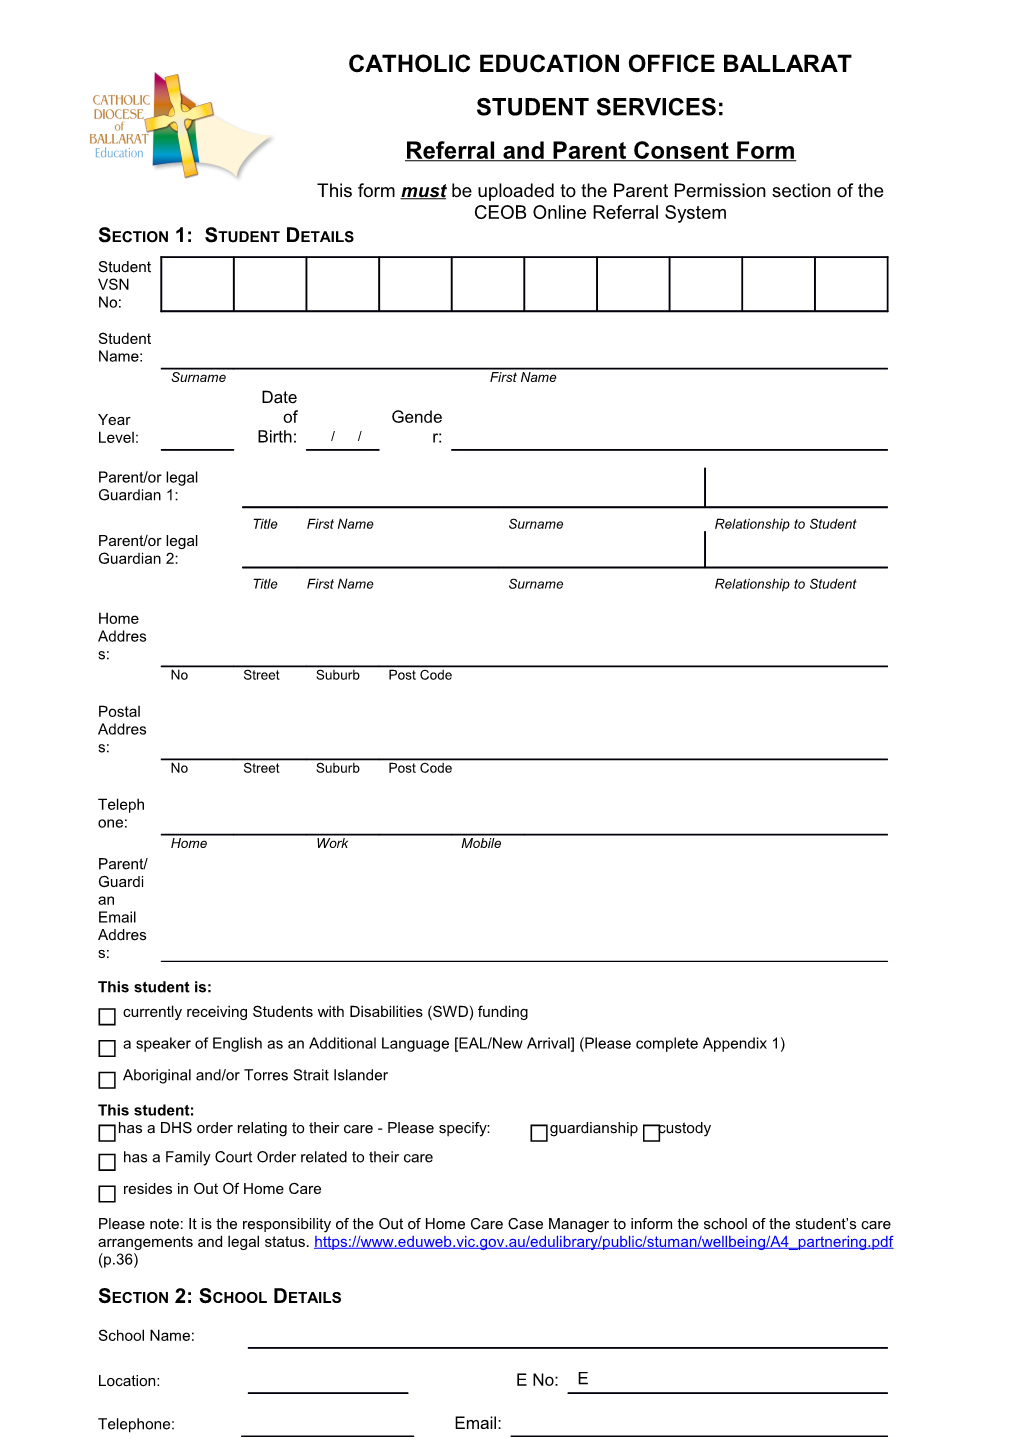 Referral and Parent Consent Form 2015